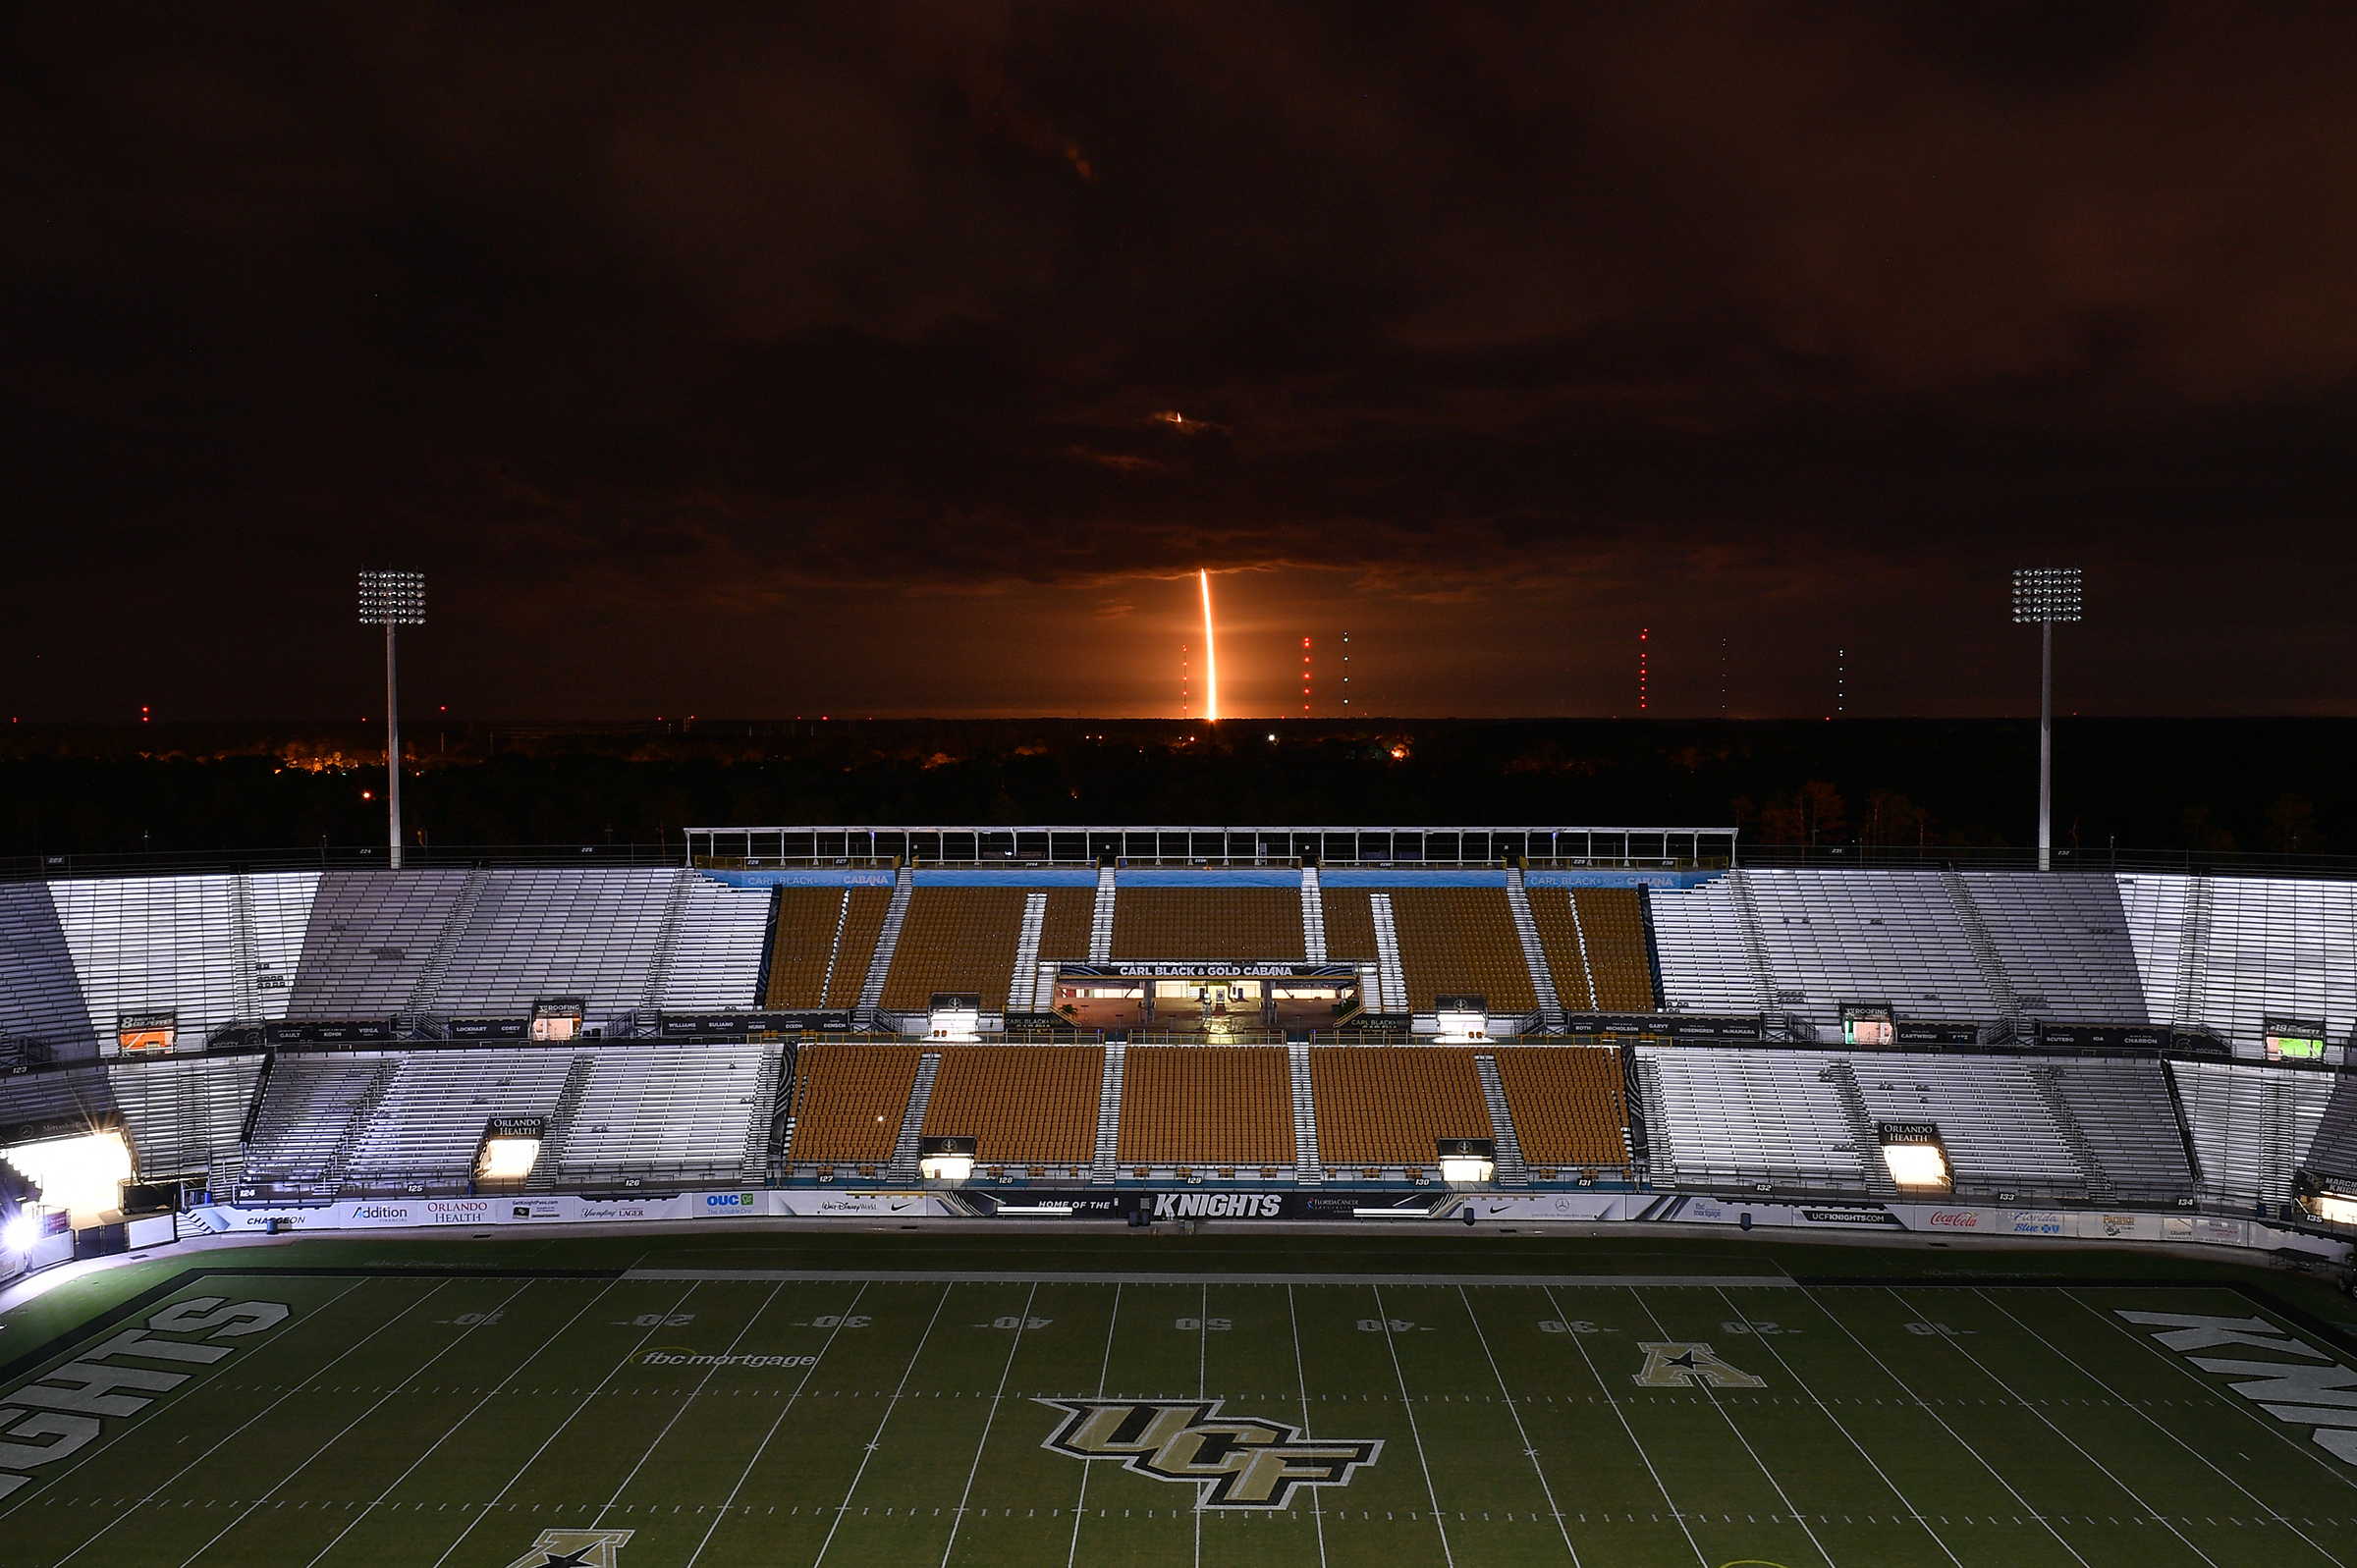 A view of the SpaceX Falcon 9 rocket launch, as seen from UCF Knight's Spectrum Stadium in Orlando, on Nov. 15.